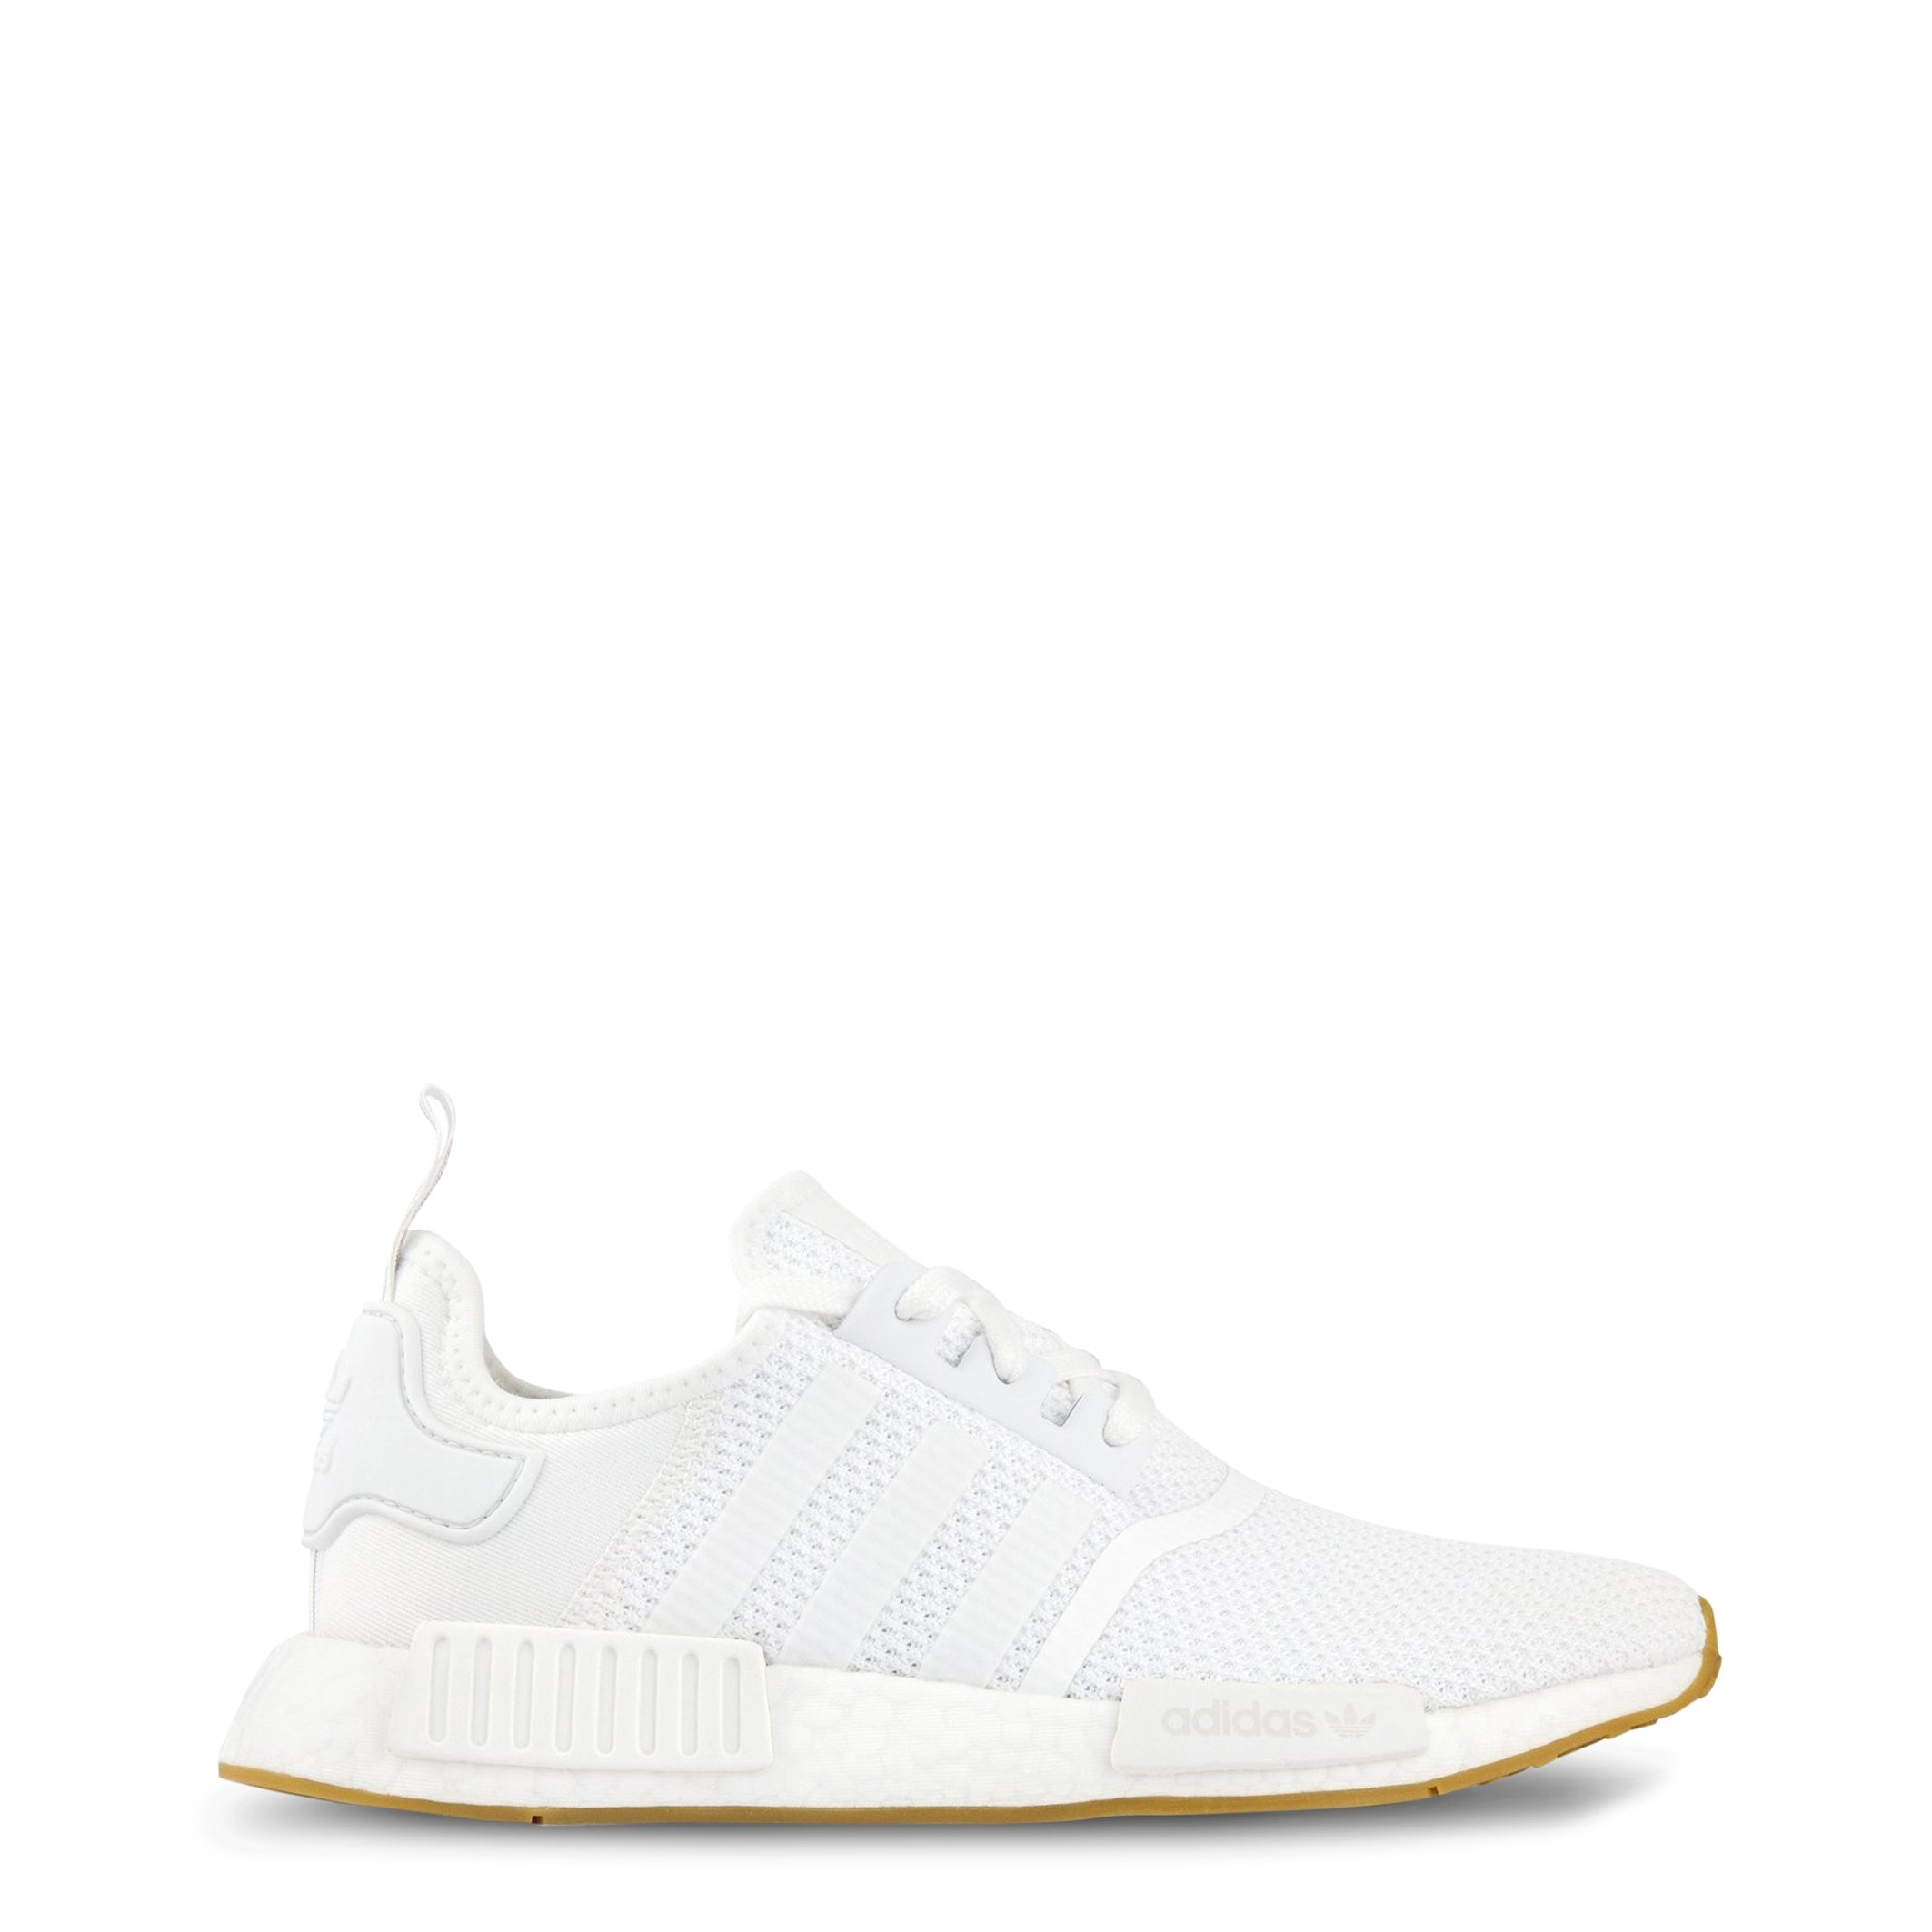 Adidas – NMD-R1_STLT – Shoes Sneakers – White / Uk 5.0 – Love Your Fashion